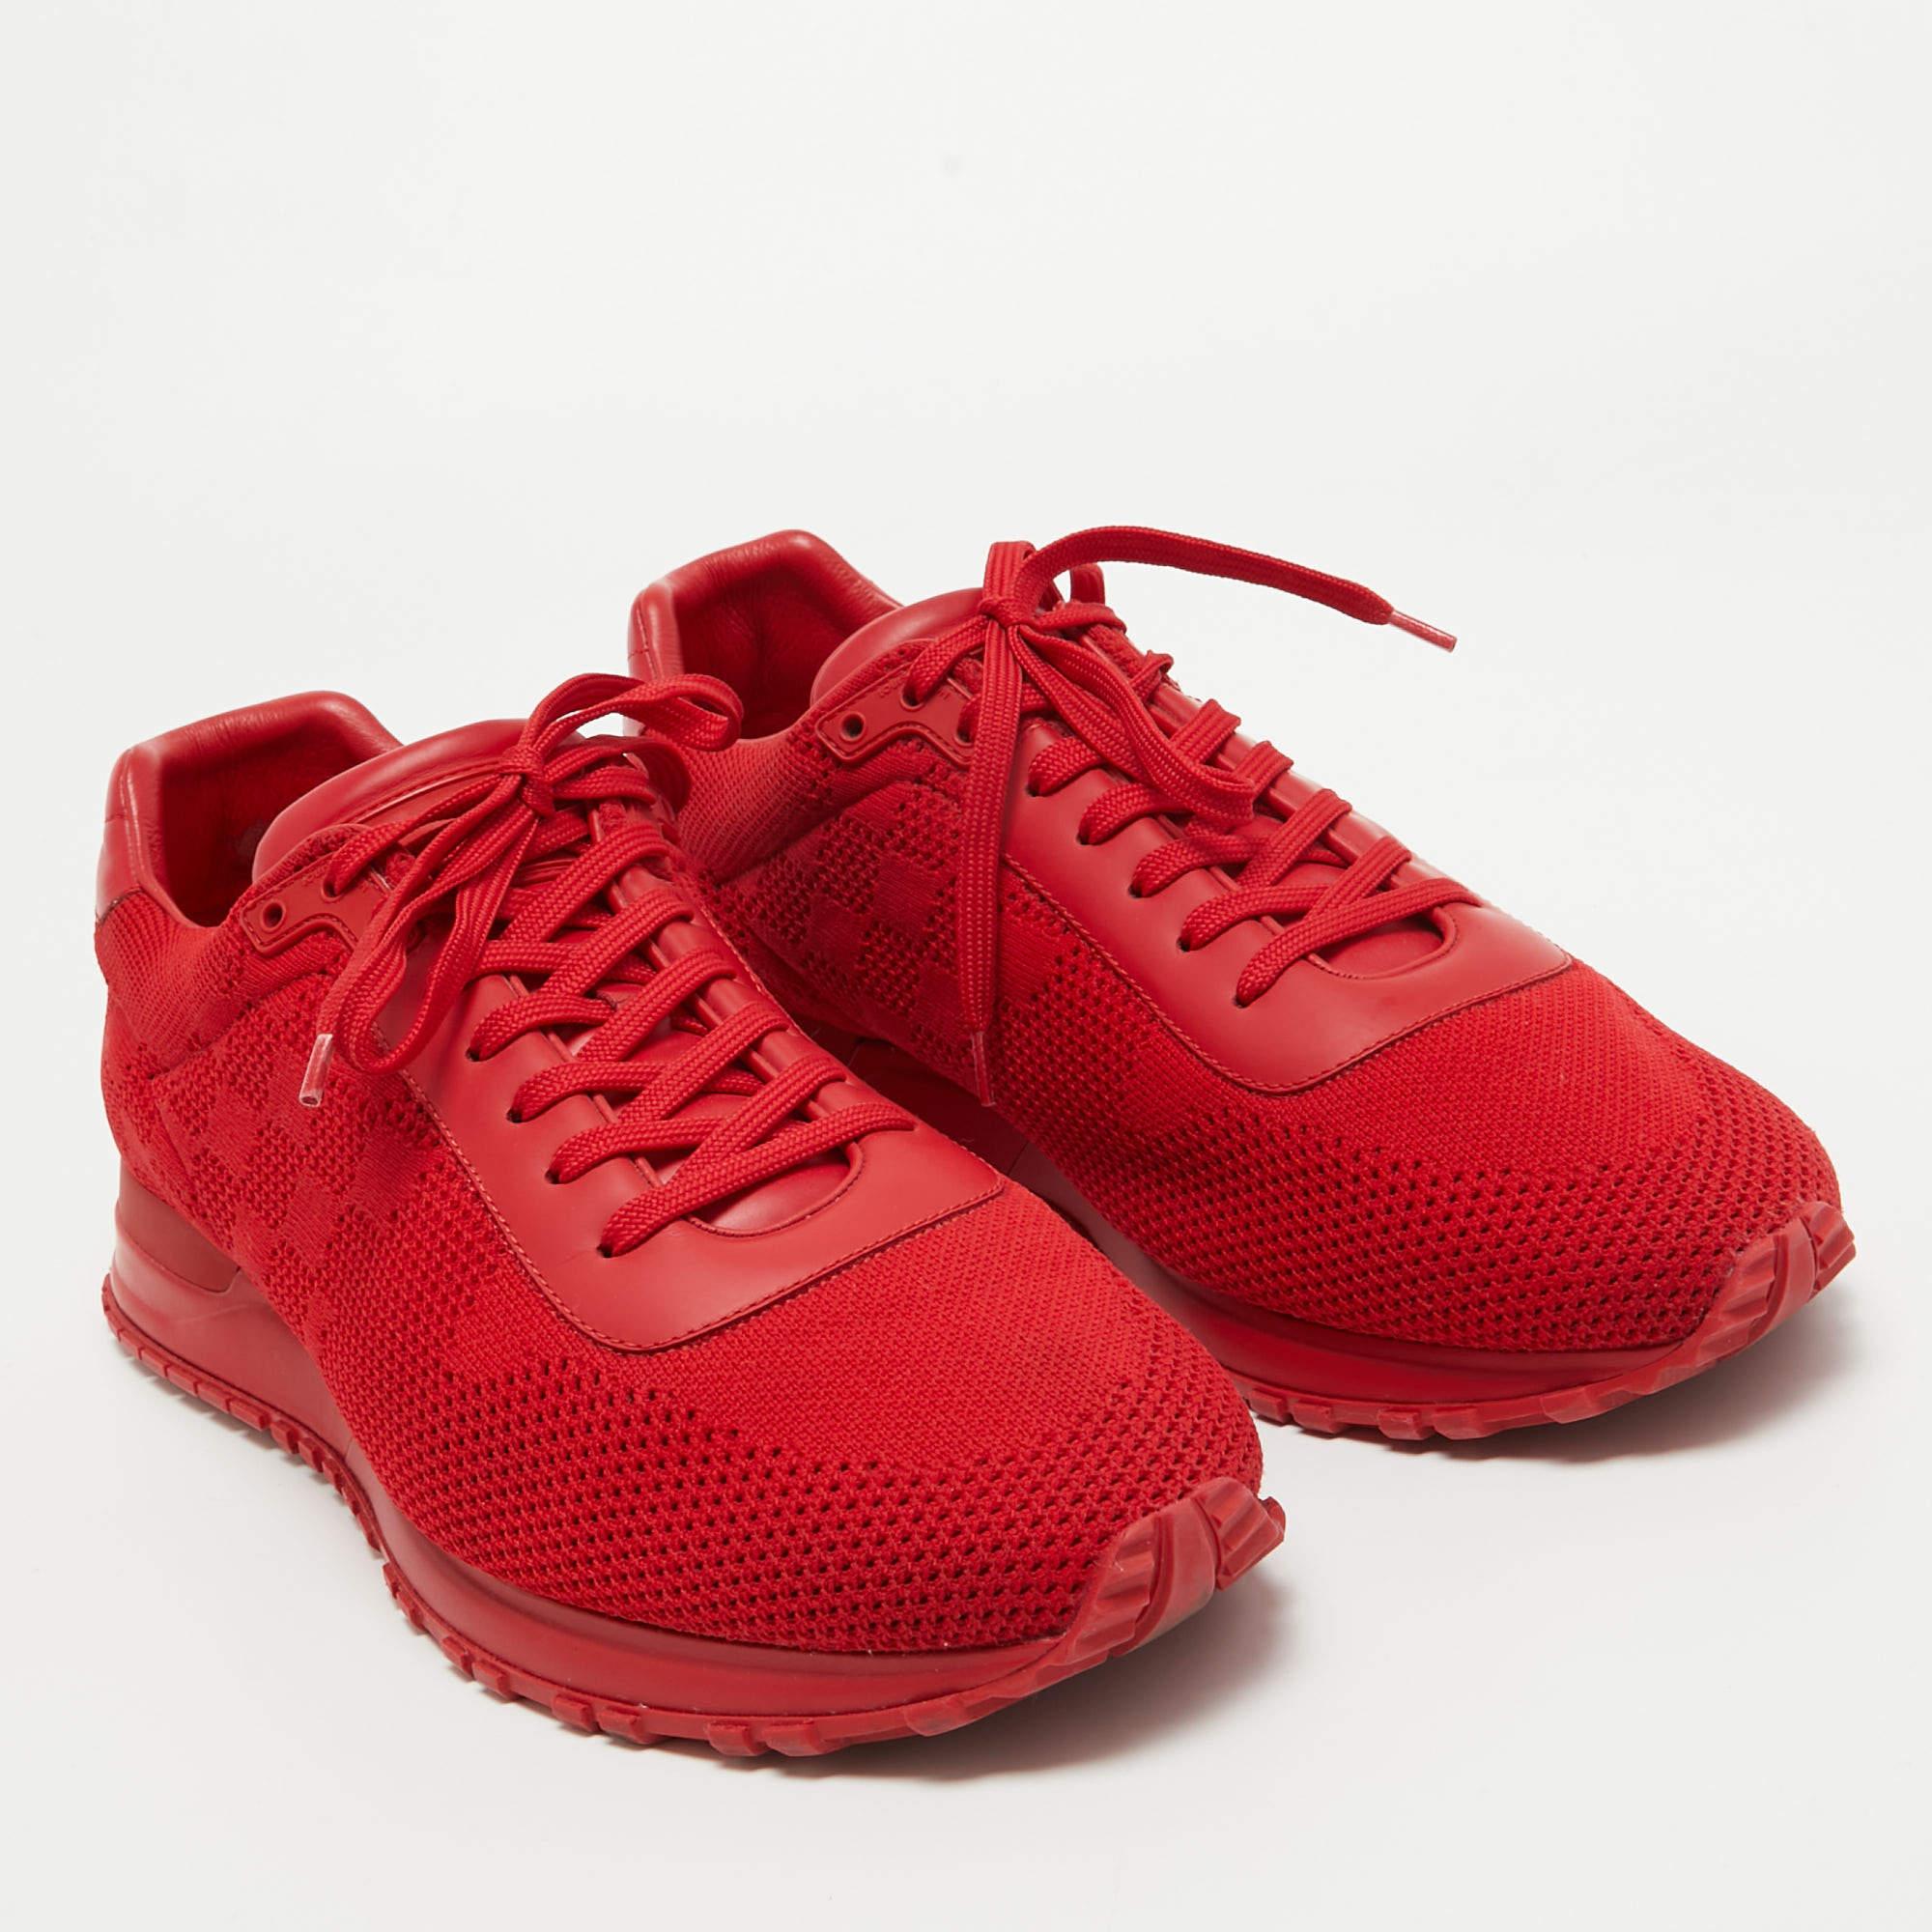 Louis Vuitton Red Leather and Mesh Runaway Damier Sneakers Size 43 In Good Condition For Sale In Dubai, Al Qouz 2